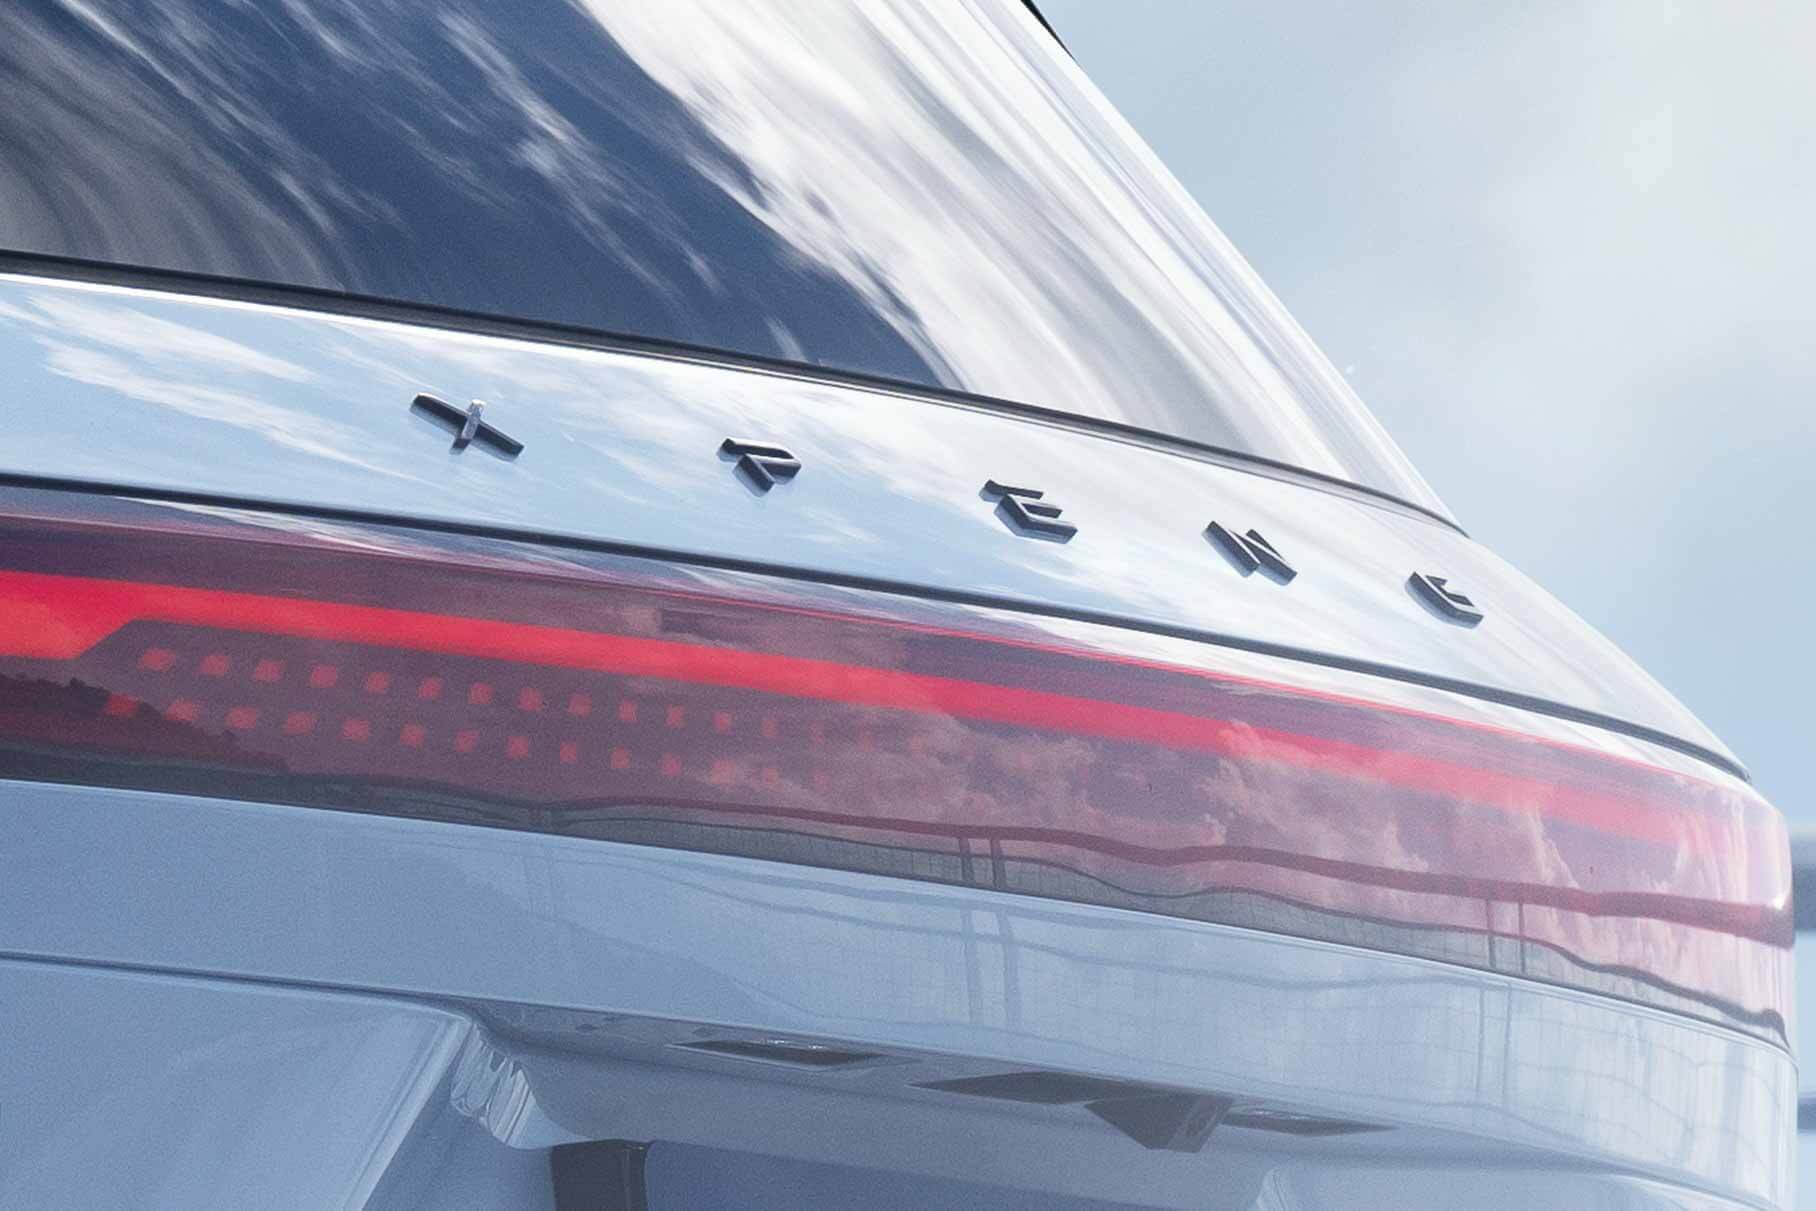 New Volkswagen electric cars will be developed on an old Chinese platform